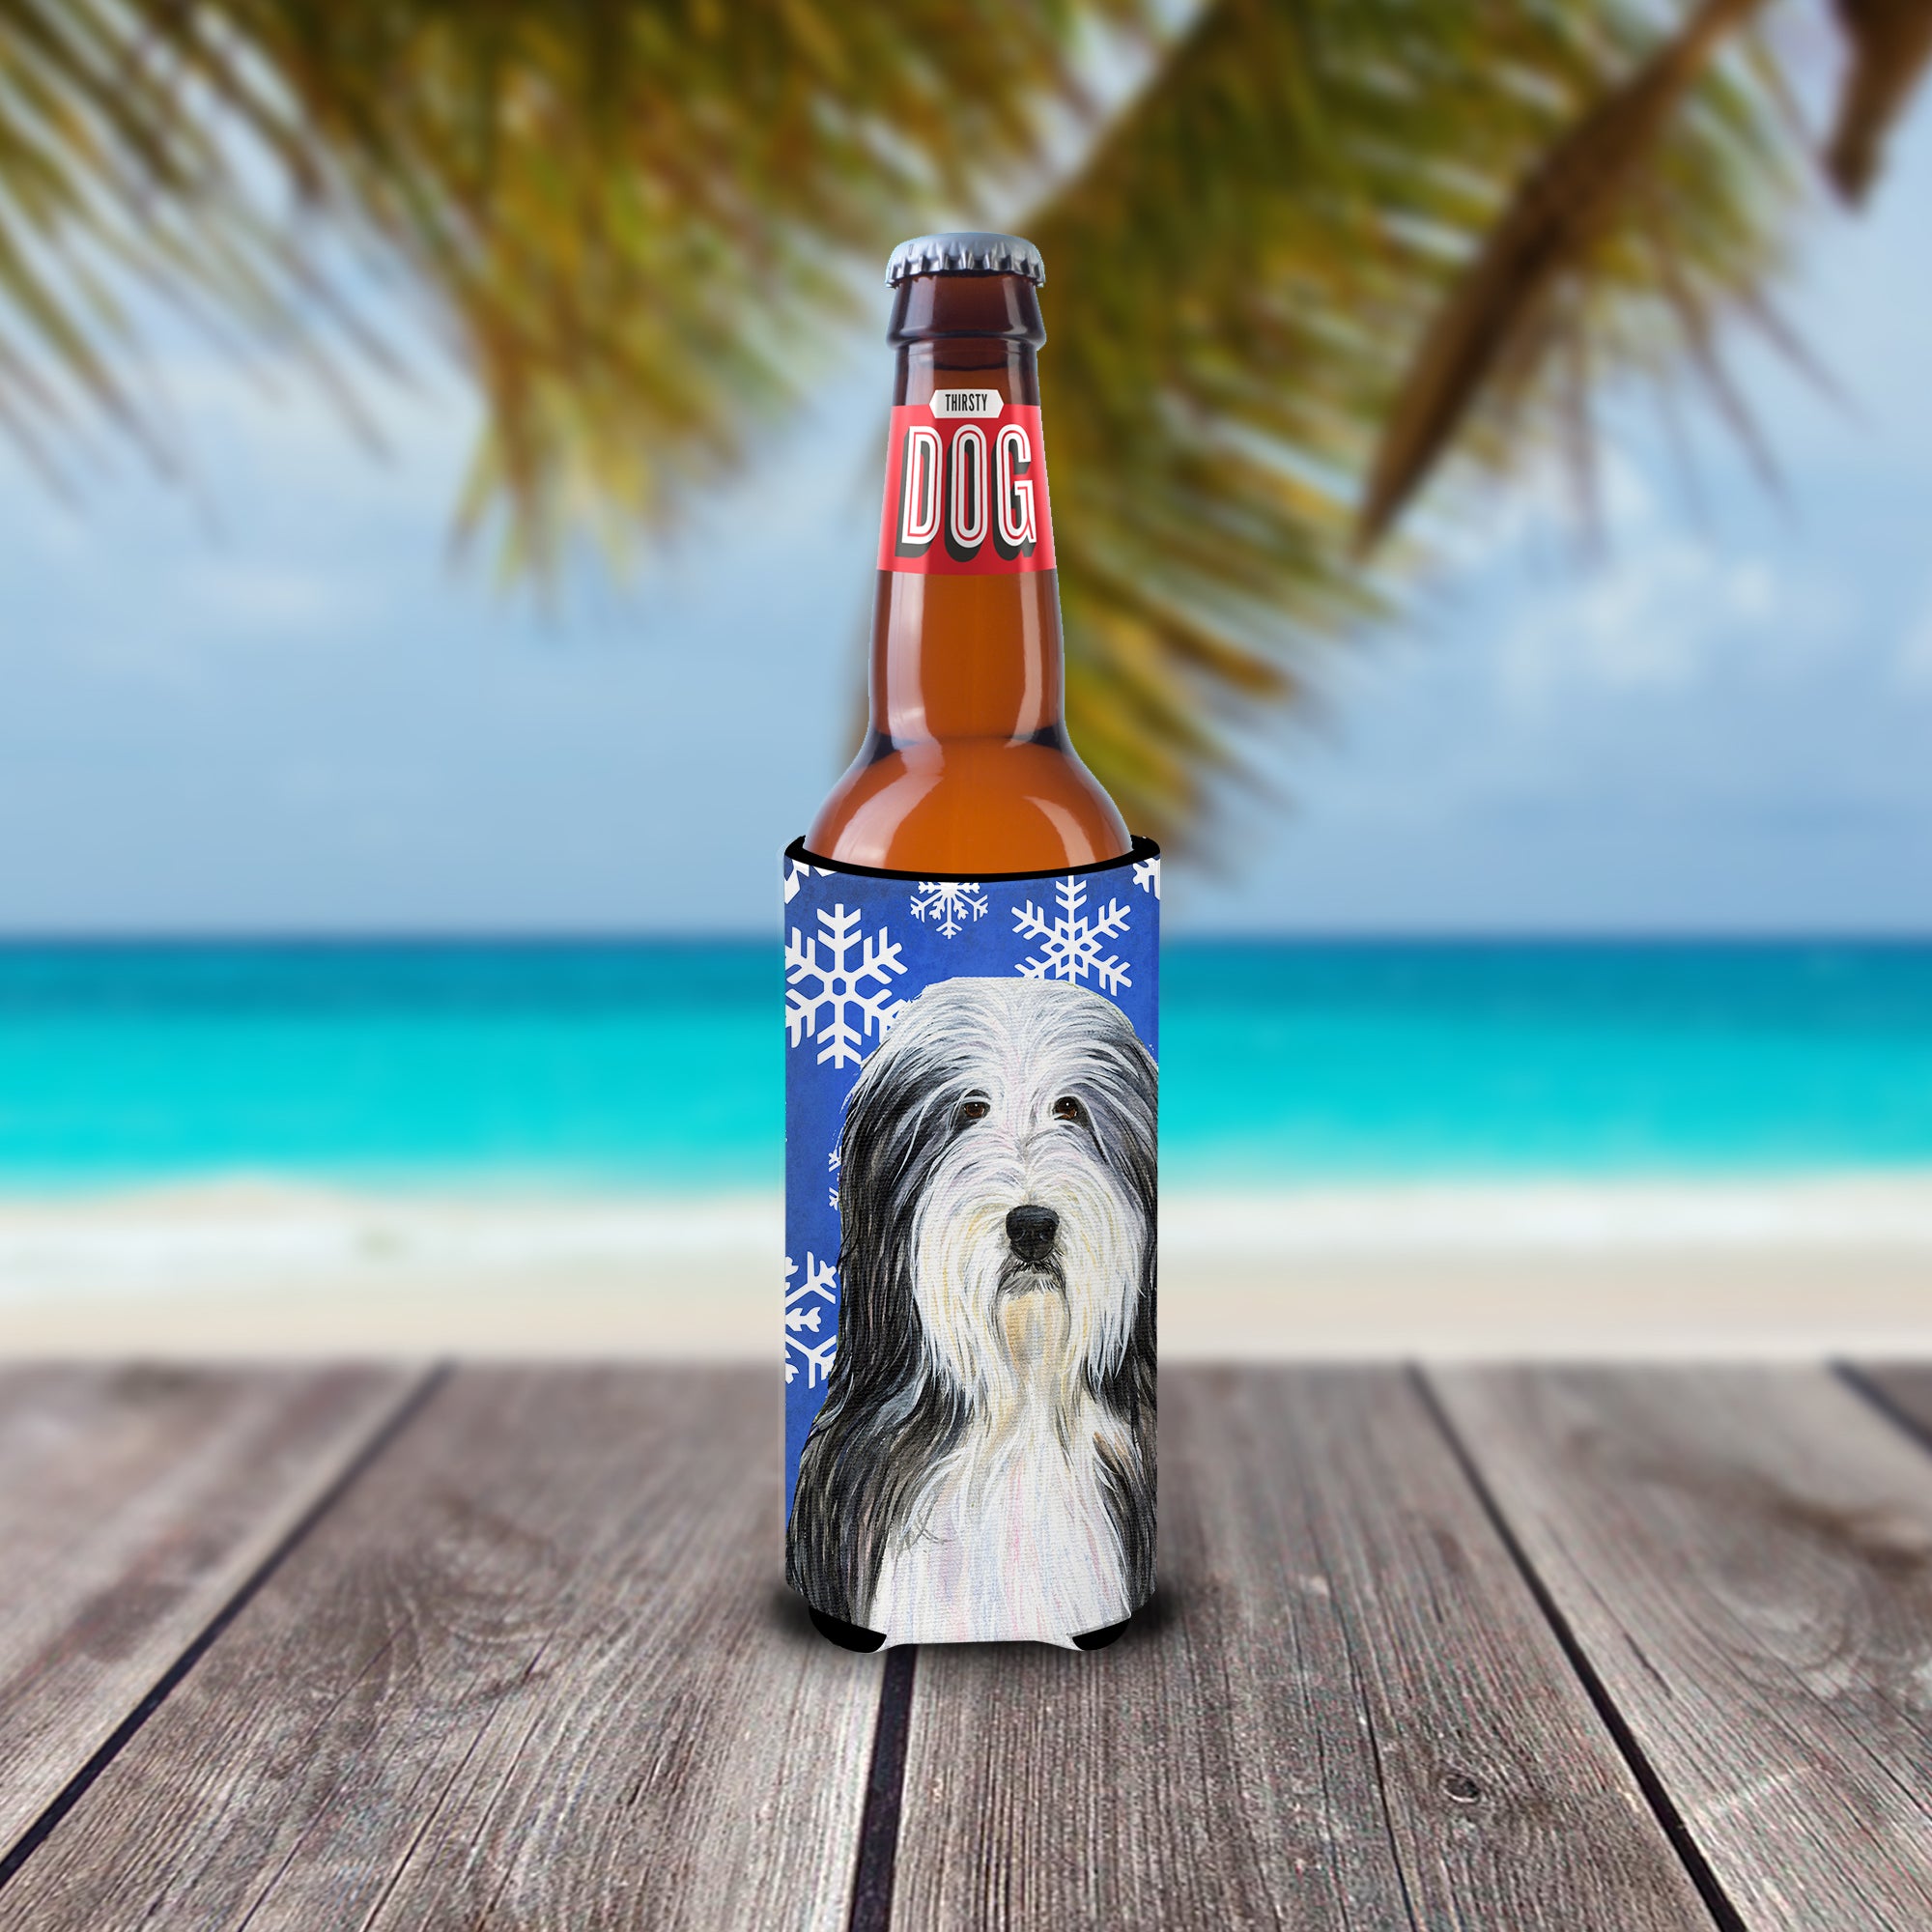 Bearded Collie Winter Snowflakes Holiday Ultra Beverage Insulators for slim cans SS4635MUK